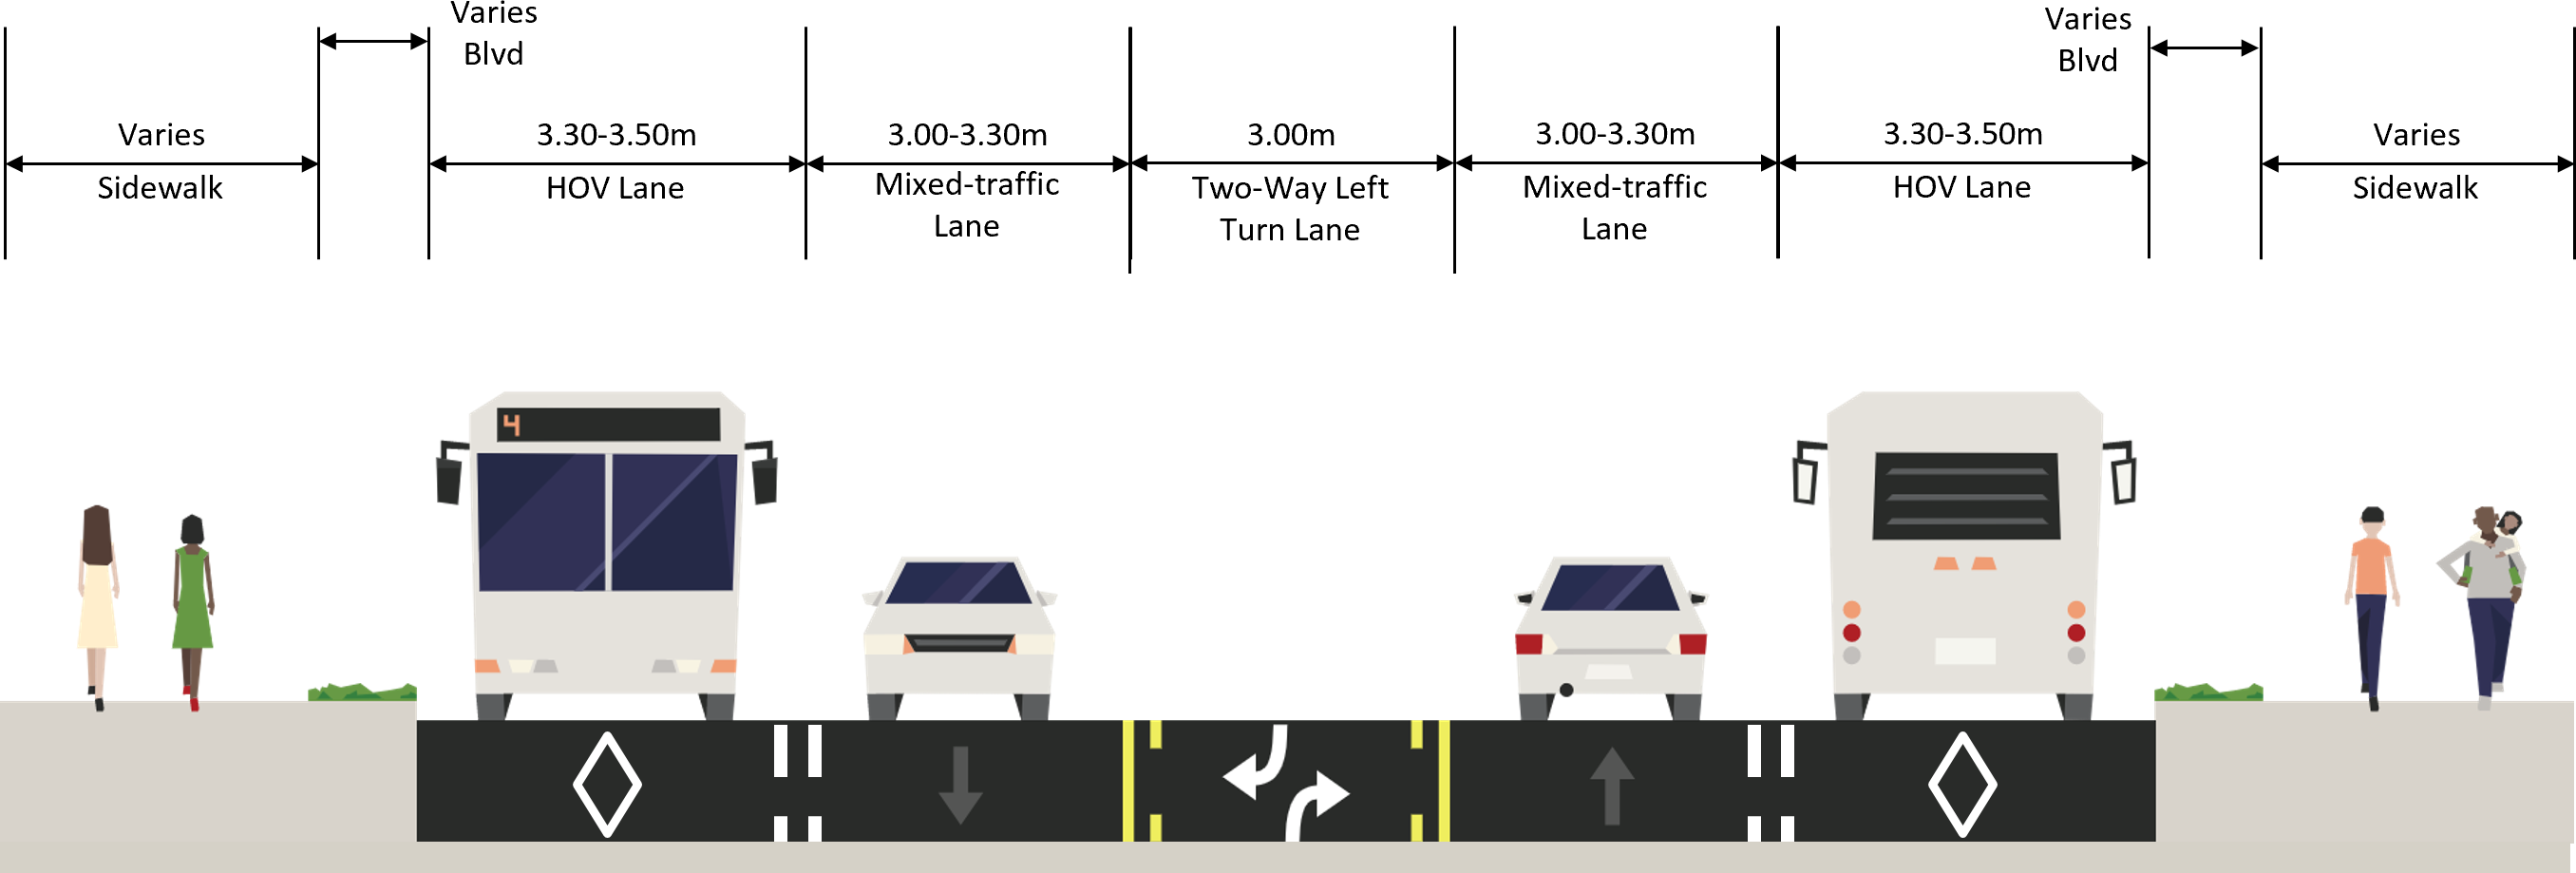 Typical cross-section for Option 4. From left to right: sidewalk, boulevard, high occupancy vehicle lane (3+), mixed-traffic lane, two-way left turn lane, mixed-traffic lane, high occupancy vehicle lane (3+), boulevard and sidewalk.